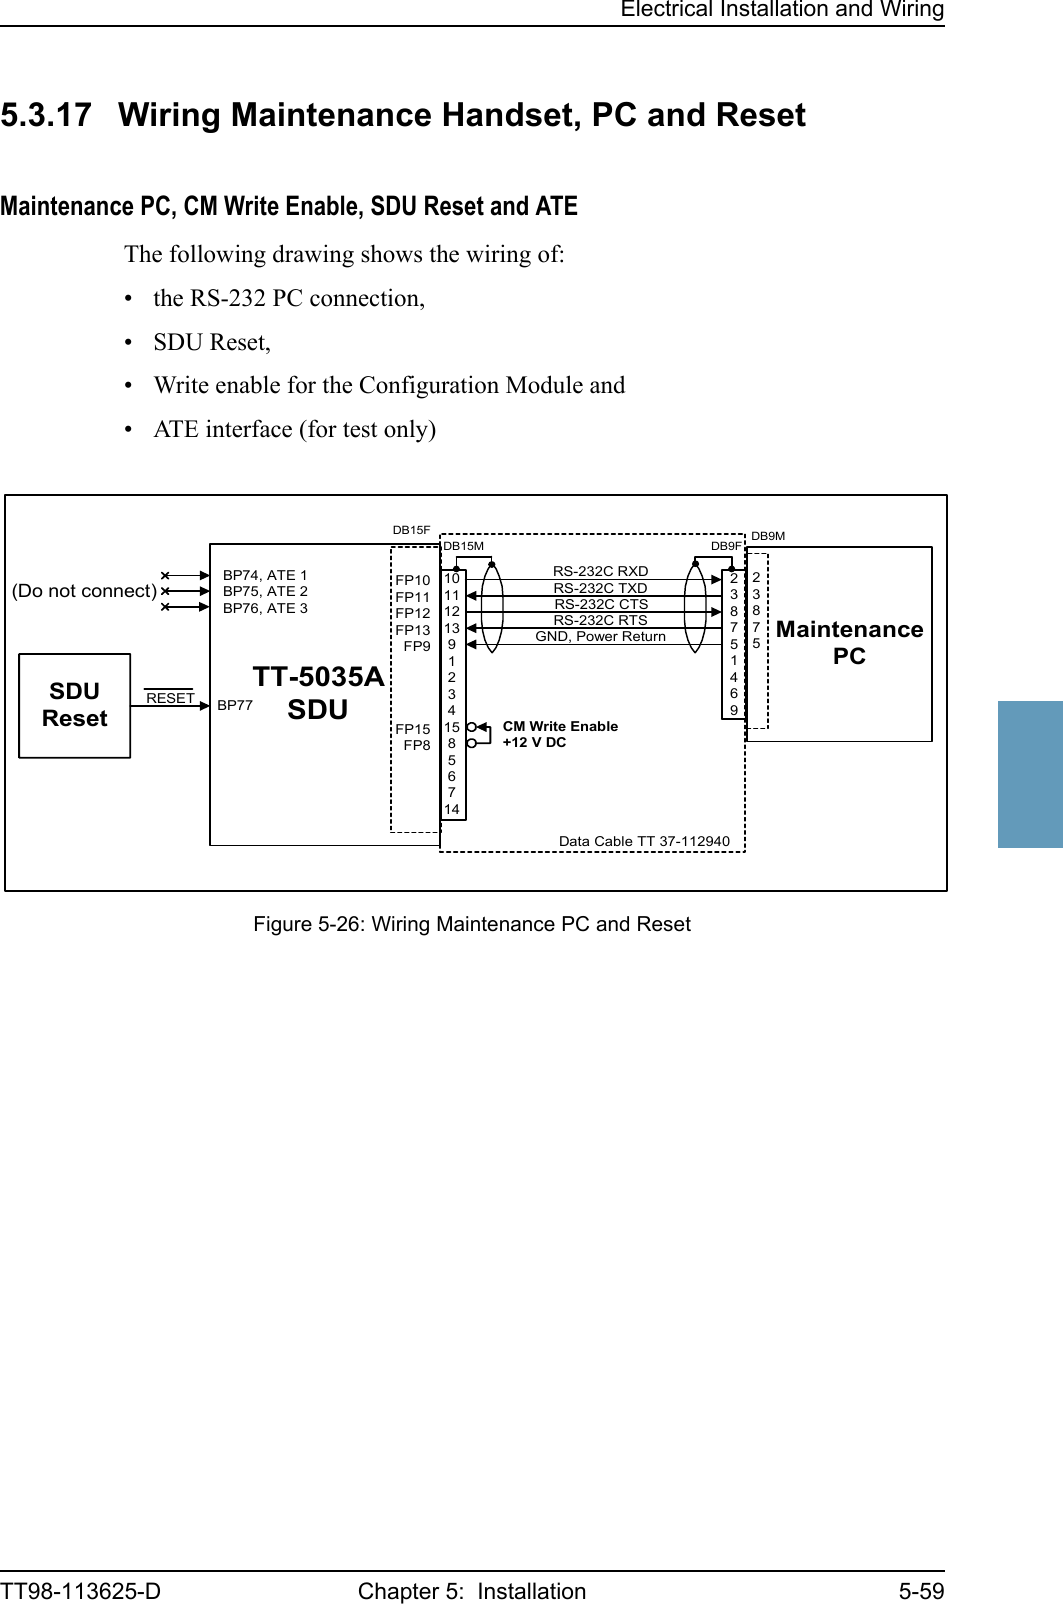 Electrical Installation and WiringTT98-113625-D Chapter 5:  Installation 5-5955555.3.17 Wiring Maintenance Handset, PC and ResetMaintenance PC, CM Write Enable, SDU Reset and ATE The following drawing shows the wiring of:• the RS-232 PC connection, • SDU Reset,• Write enable for the Configuration Module and• ATE interface (for test only)Figure 5-26: Wiring Maintenance PC and ResetTT-5035ASDURESET BP77FP10FP11FP12FP13FP9FP15FP8GND, Power ReturnMaintenancePCRS-232C RTSRS-232C RXDRS-232C TXDRS-232C CTSBP74, ATE 1BP75, ATE 2BP76, ATE 3(Do not connect)SDUResetDB15FDB15M101112139123415856714DB9F238751469CM Write EnableData Cable TT 37-112940+12 V DCDB9M23875